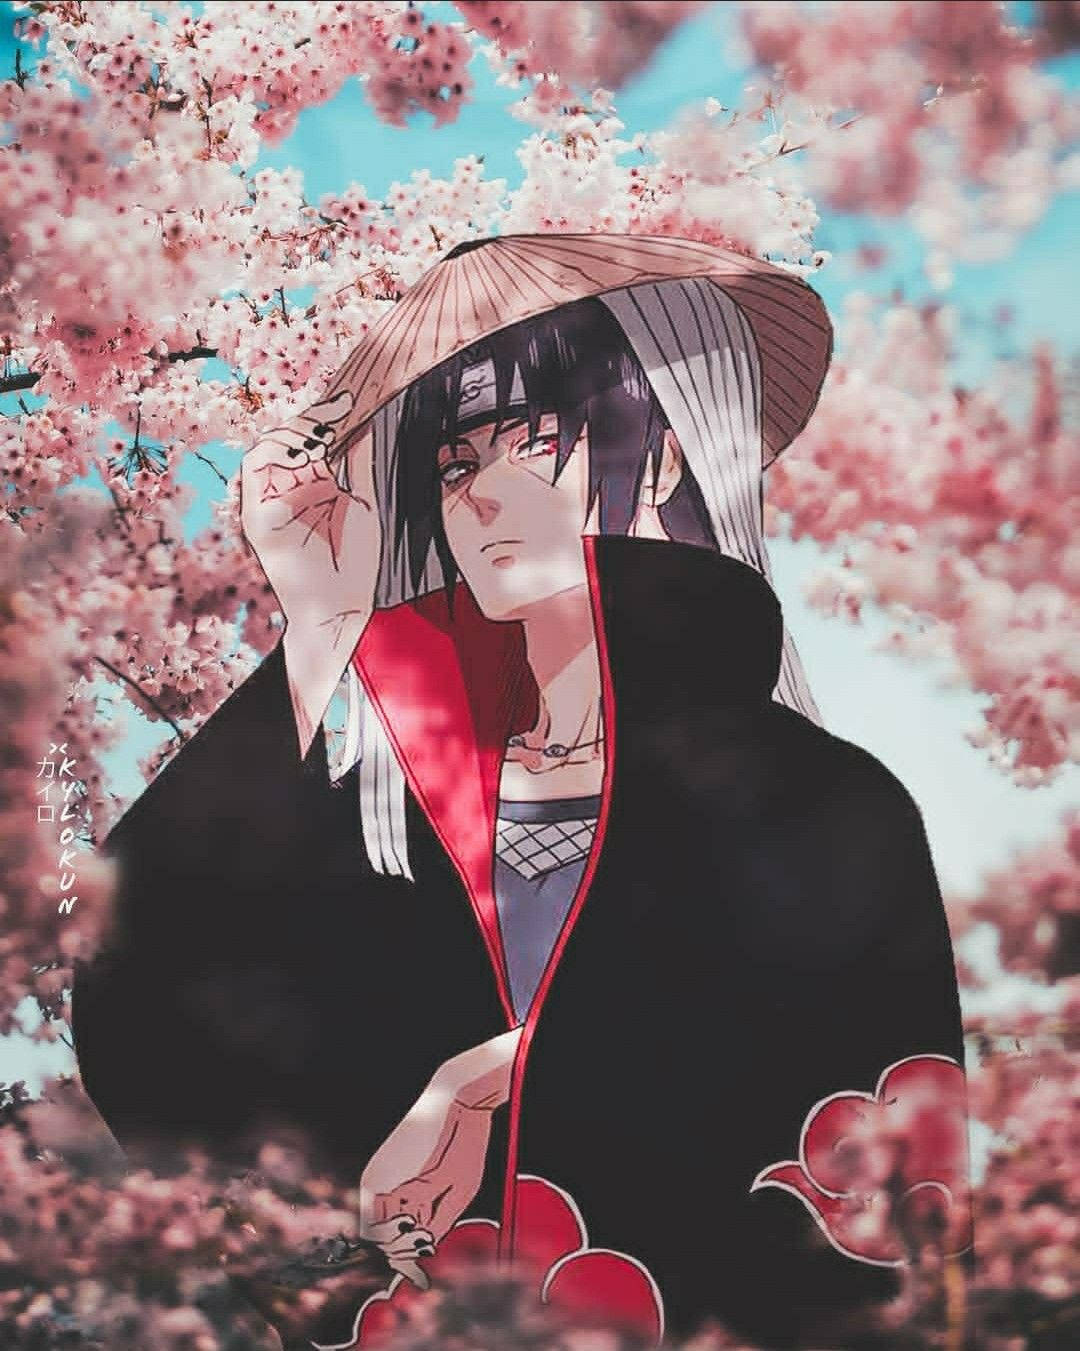 1080X1351 Itachi Wallpaper and Background